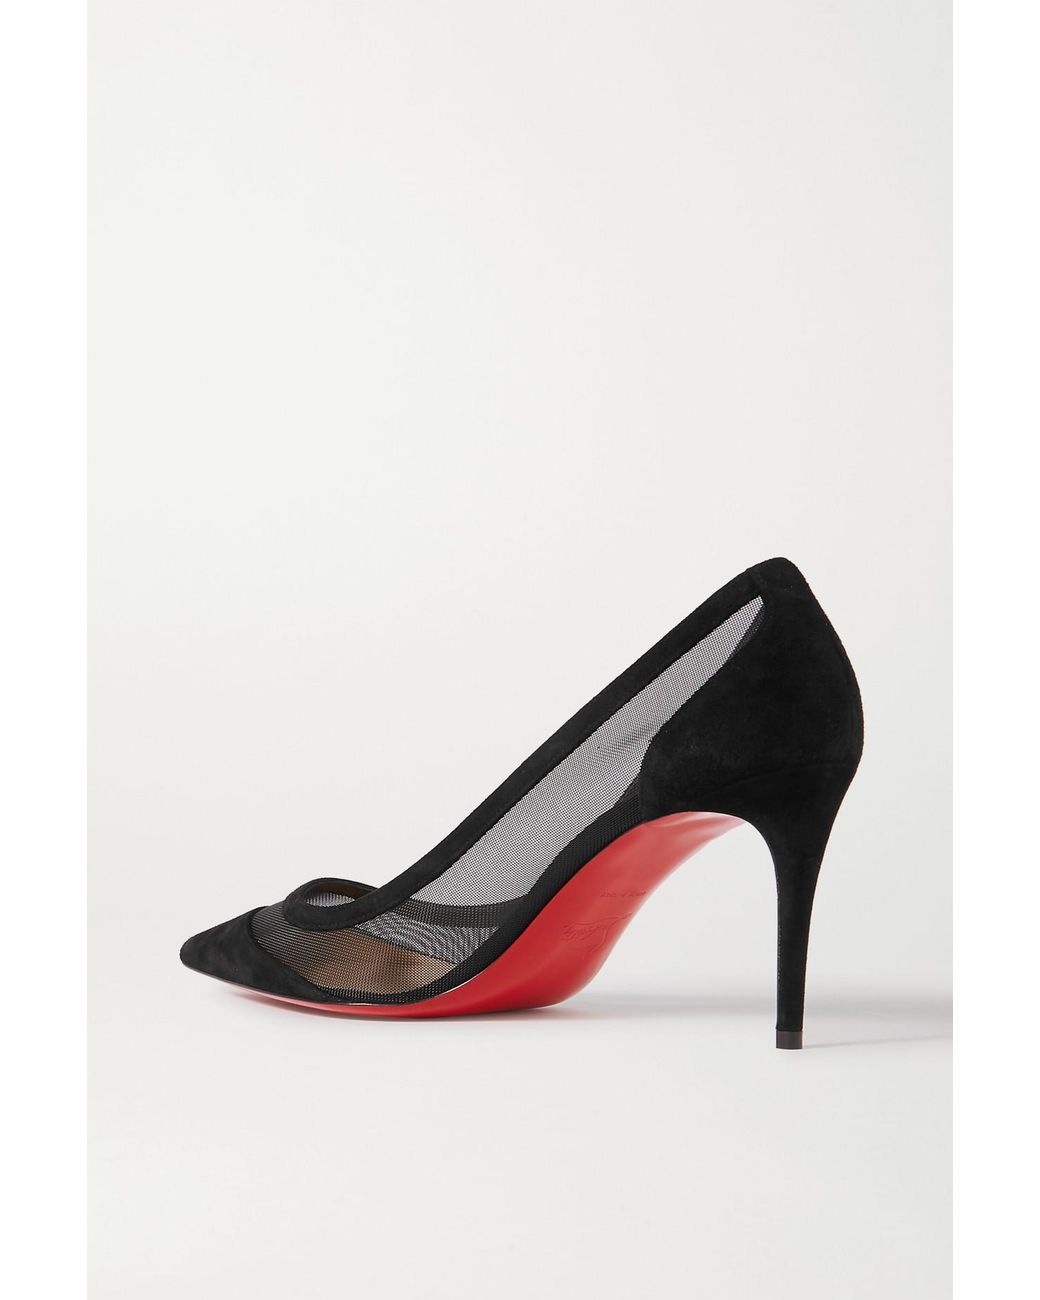 Christian Louboutin Galativi 85 Suede And Mesh Pumps in Black | Lyst